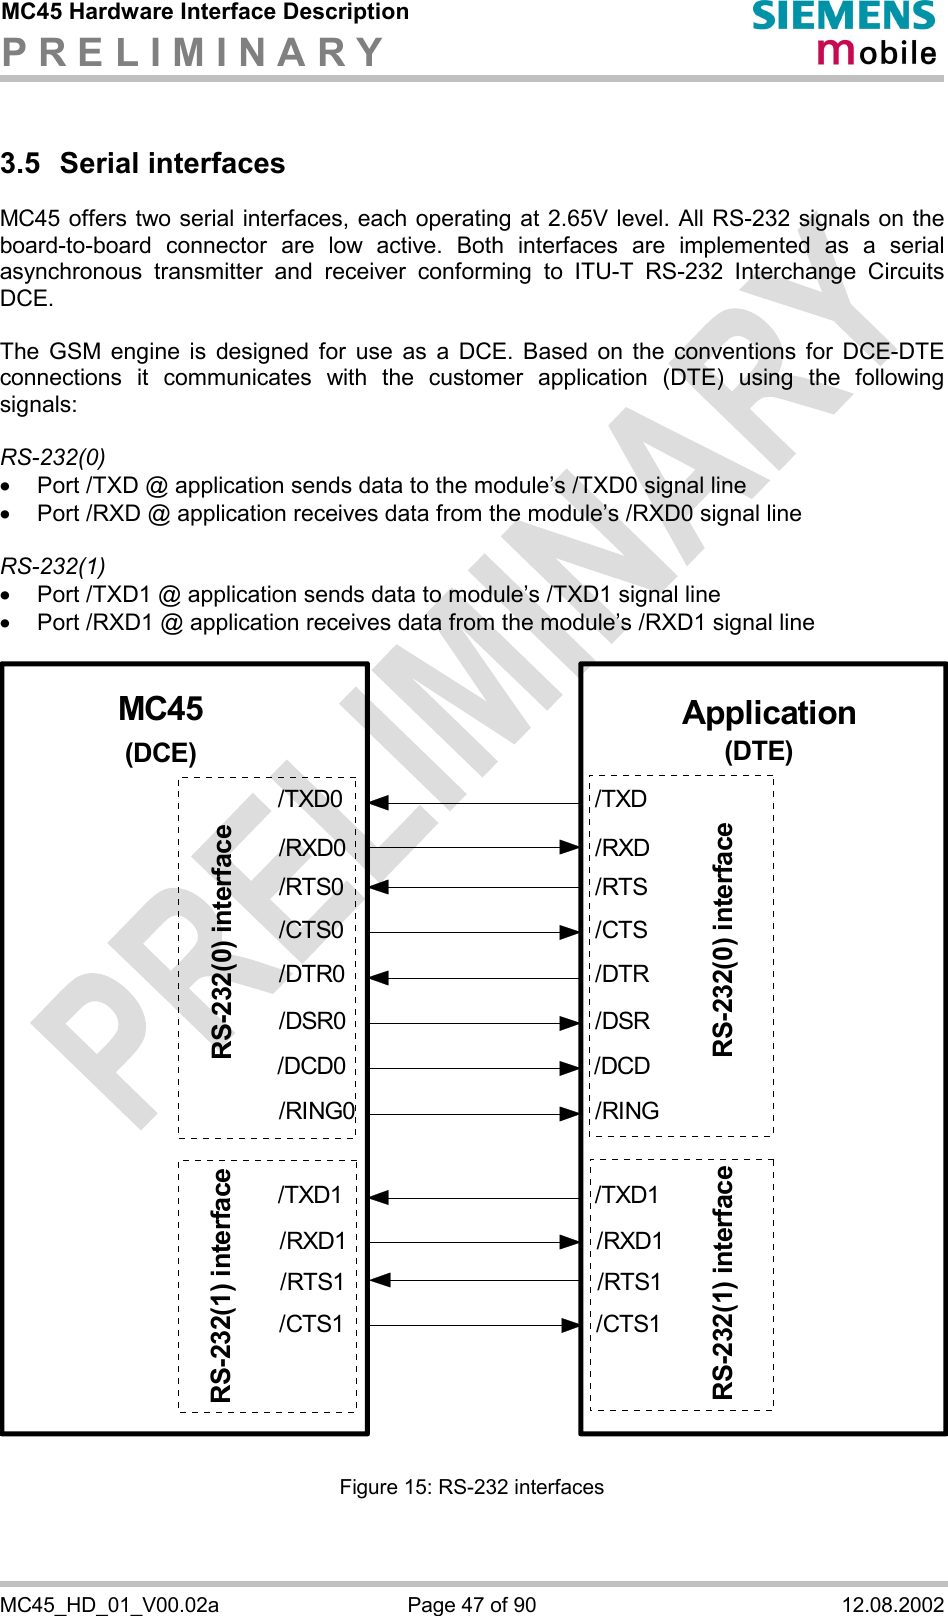 MC45 Hardware Interface Description P R E L I M I N A R Y      MC45_HD_01_V00.02a  Page 47 of 90  12.08.2002 3.5 Serial interfaces MC45 offers two serial interfaces, each operating at 2.65V level. All RS-232 signals on the board-to-board connector are low active. Both interfaces are implemented as a serial asynchronous transmitter and receiver conforming to ITU-T RS-232 Interchange Circuits DCE.  The GSM engine is designed for use as a DCE. Based on the conventions for DCE-DTE connections it communicates with the customer application (DTE) using the following signals:  RS-232(0) ·  Port /TXD @ application sends data to the module’s /TXD0 signal line ·  Port /RXD @ application receives data from the module’s /RXD0 signal line  RS-232(1) ·  Port /TXD1 @ application sends data to module’s /TXD1 signal line ·  Port /RXD1 @ application receives data from the module’s /RXD1 signal line  MC45 Application/TXD/RXD/RTS/CTS/RING/DCD/DSR/DTR/TXD1/RXD1/RTS1/CTS1RS-232(0) interface(DTE)(DCE)RS-232(1) interfaceRS-232(0) interfaceRS-232(1) interface/TXD0/RXD0/RTS0/CTS0/RING0/DCD0/DSR0/DTR0/TXD1/RXD1/RTS1/CTS1 Figure 15: RS-232 interfaces   